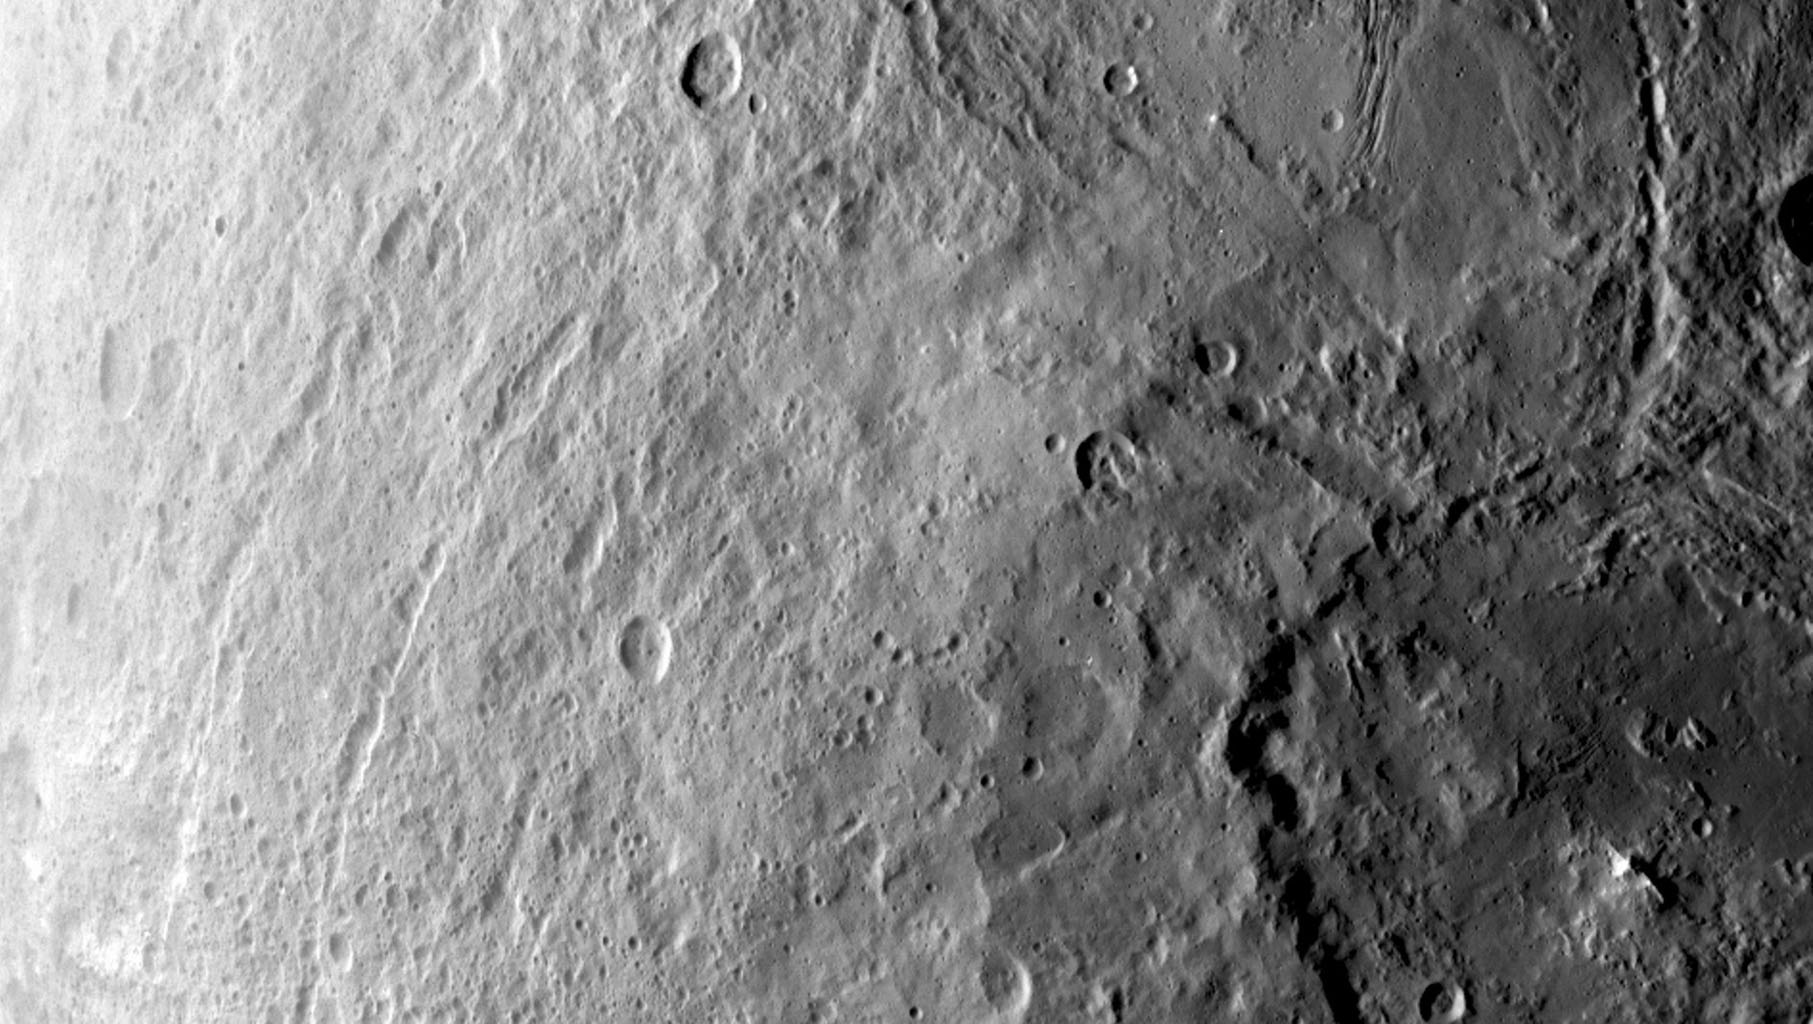 Dawn’s New Views of Ceres